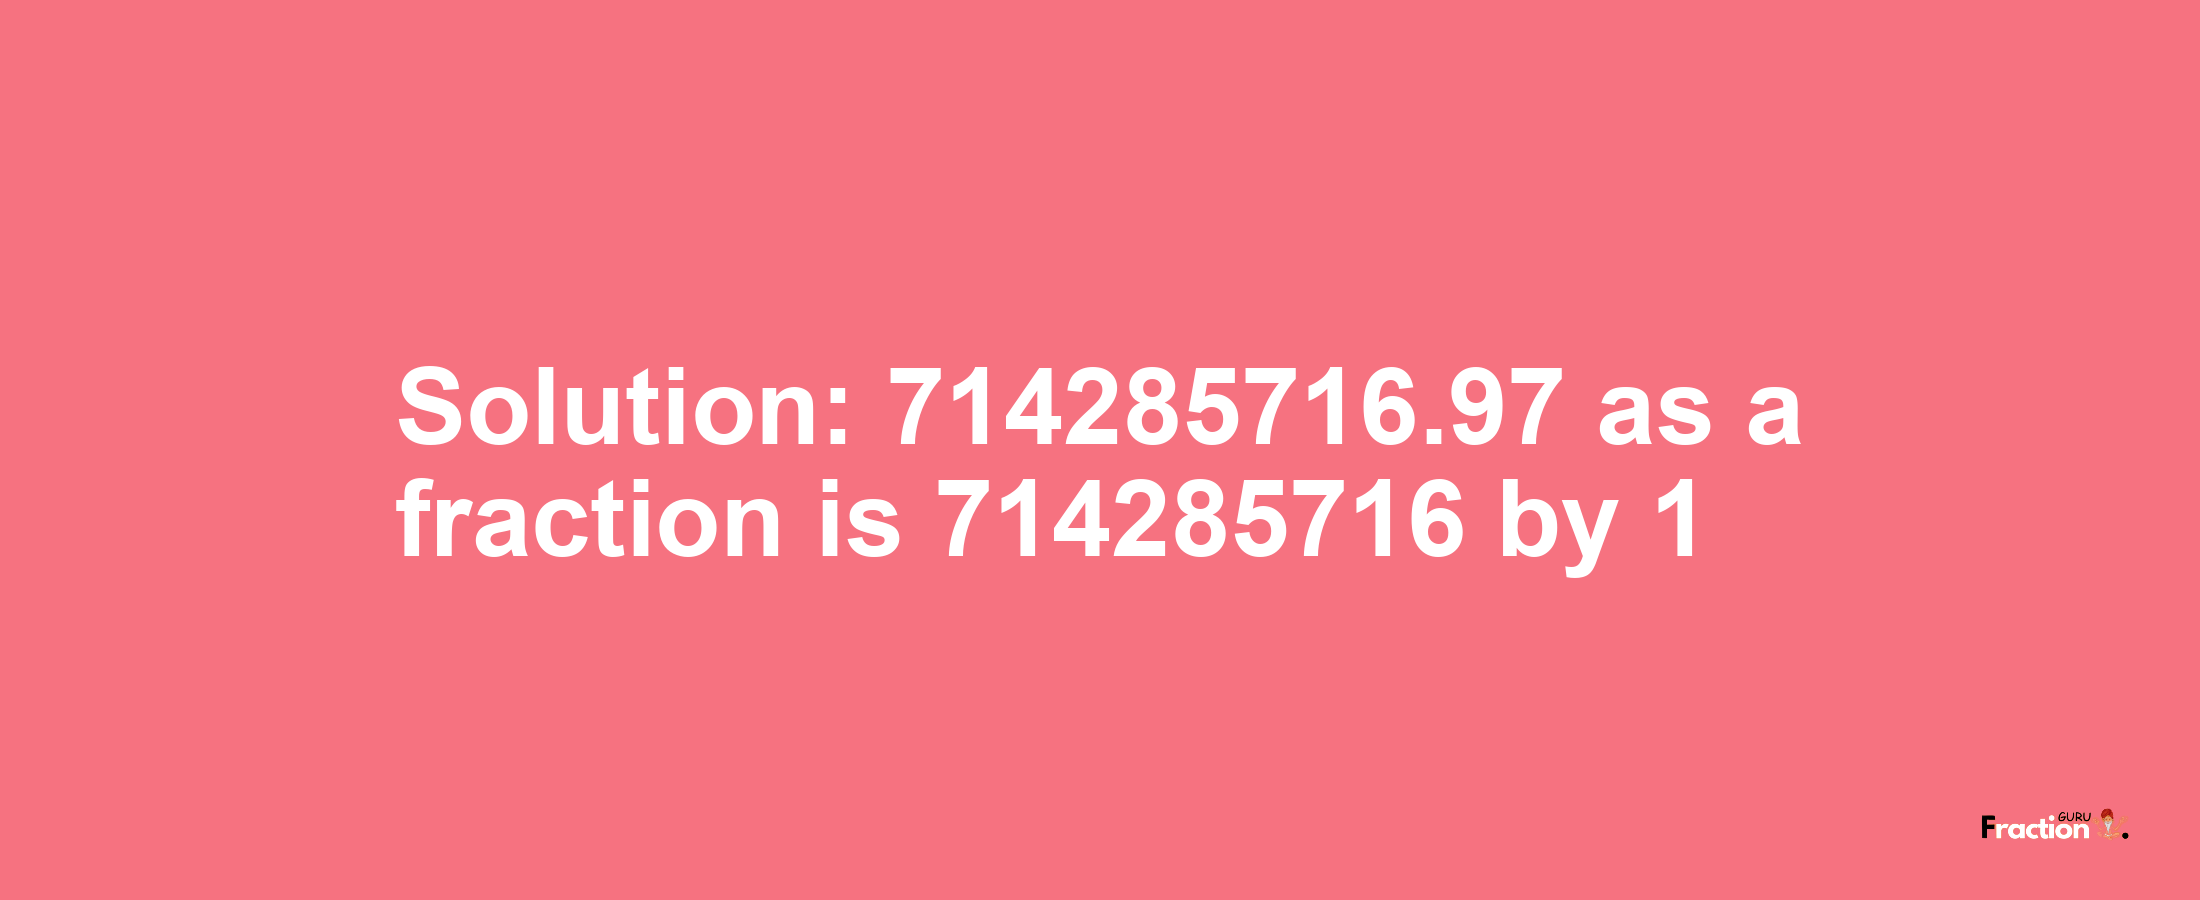 Solution:714285716.97 as a fraction is 714285716/1